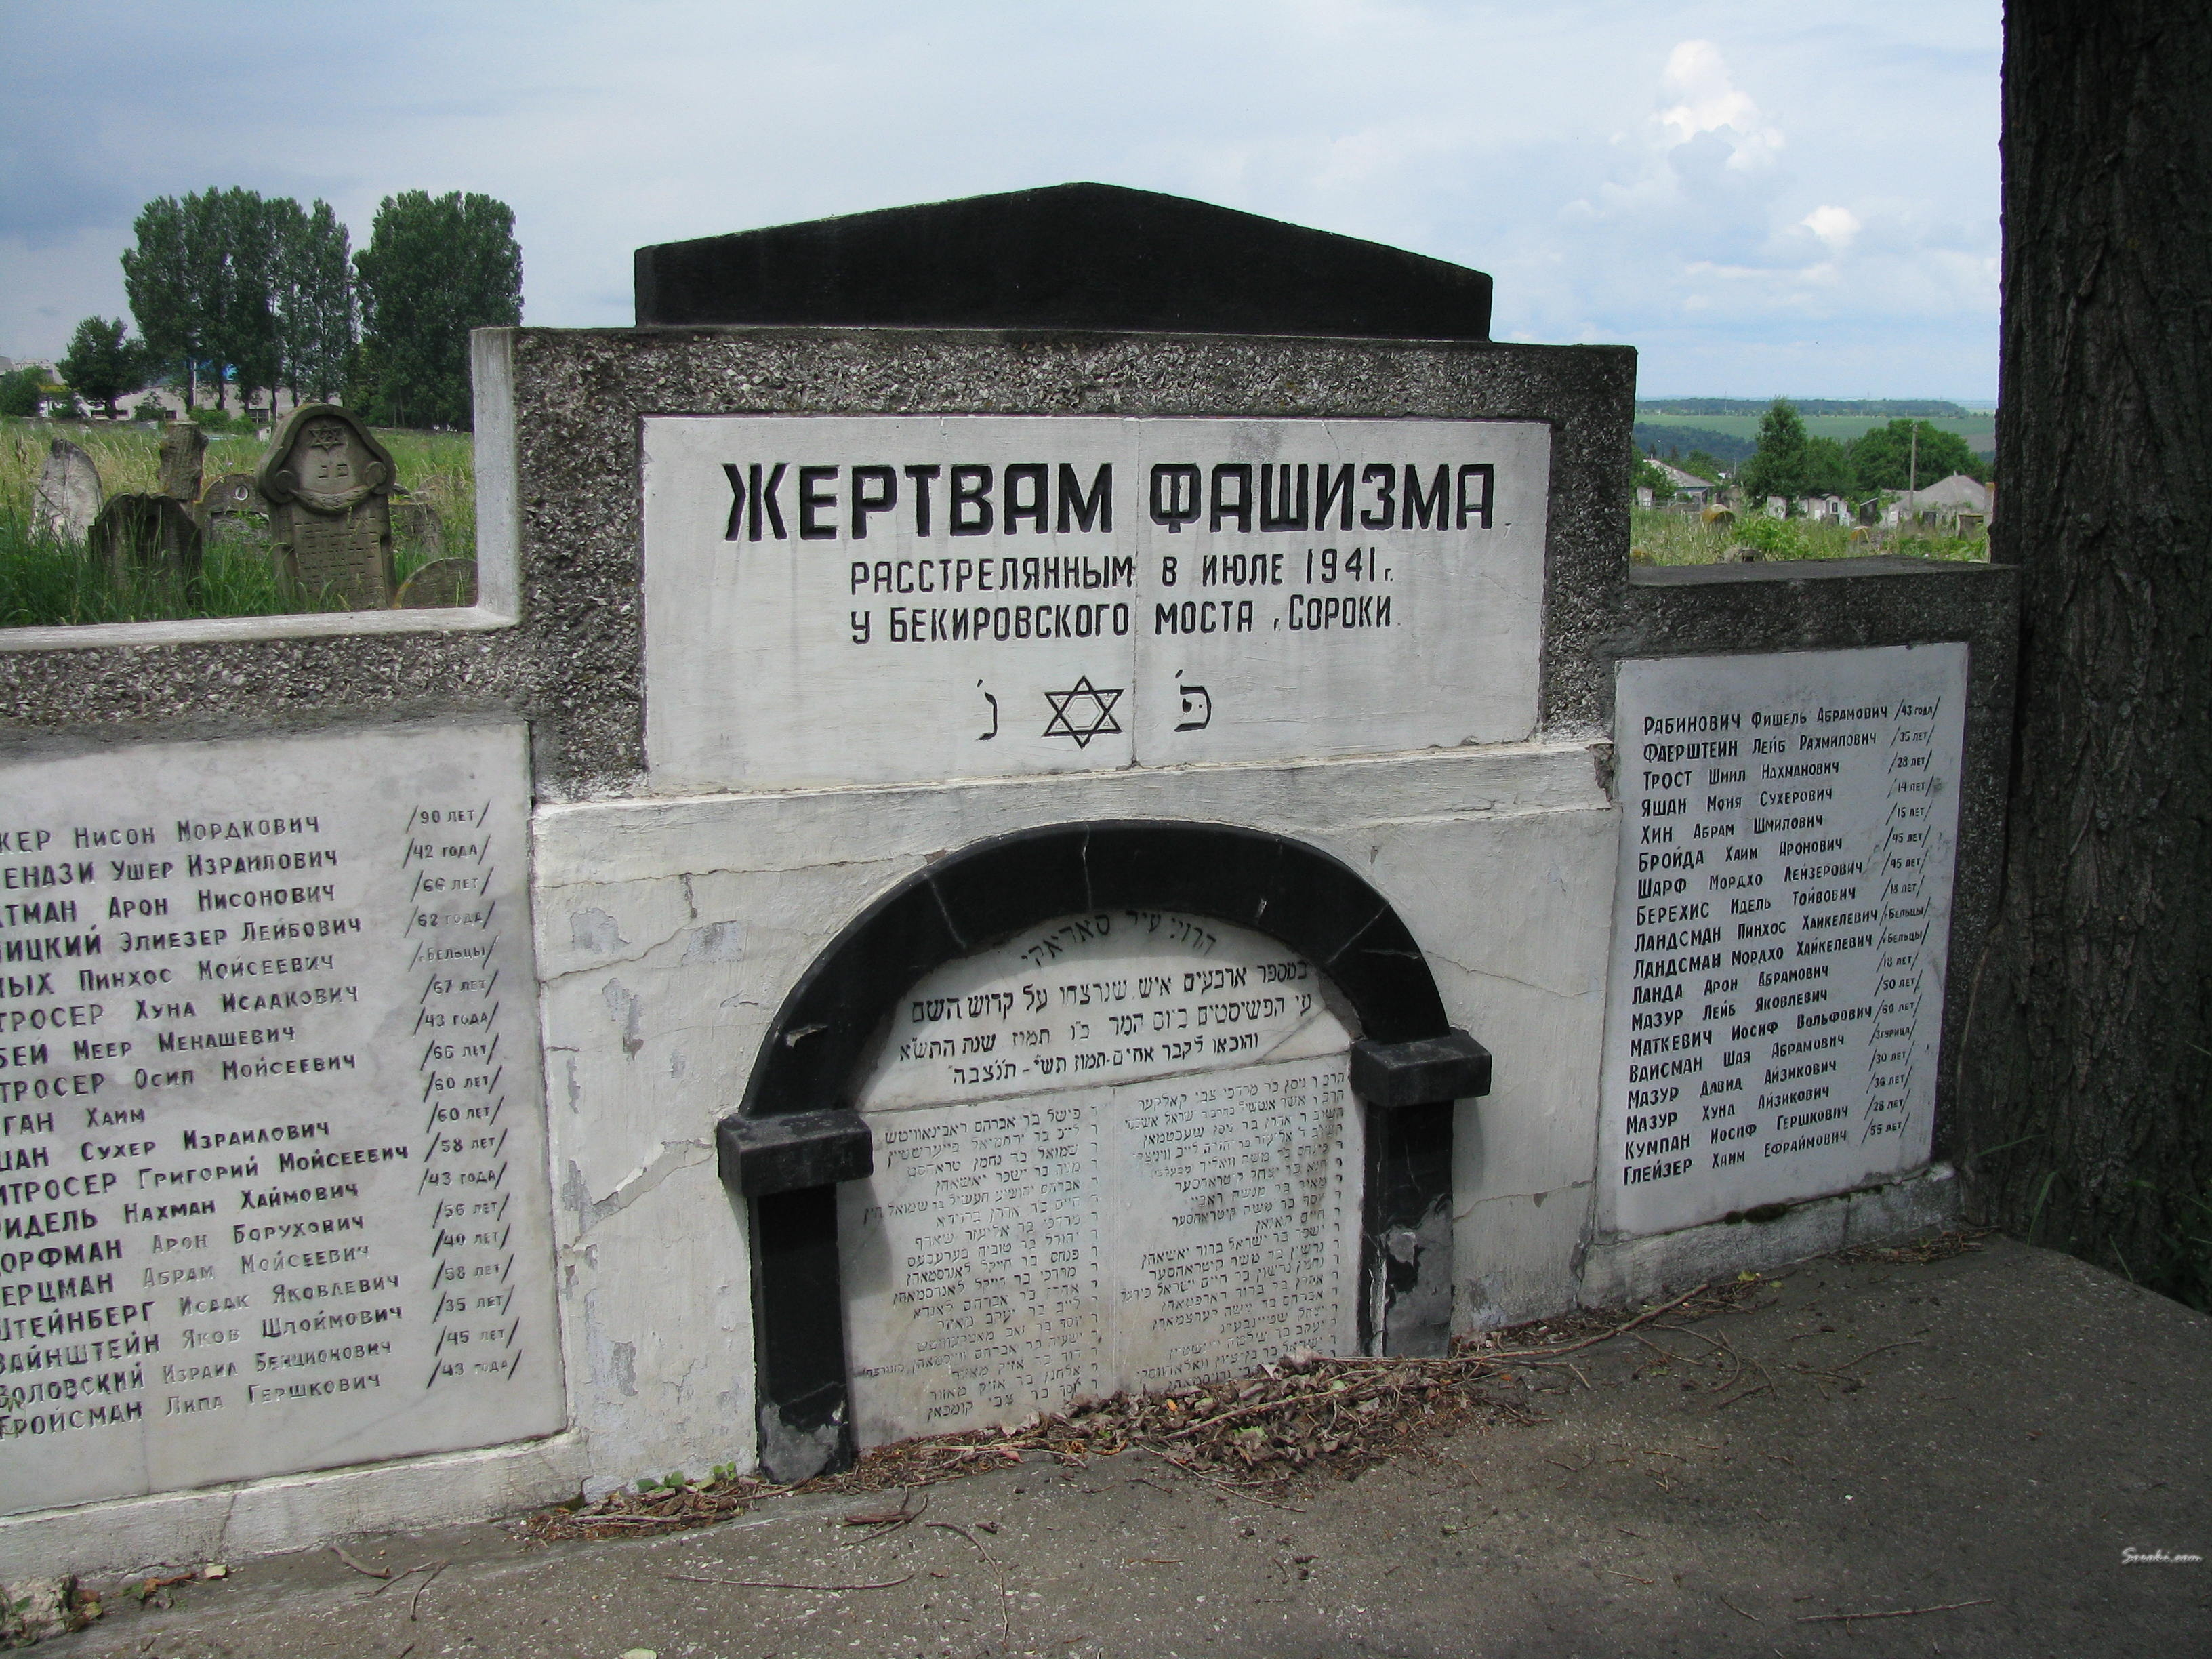 Taken at the Jewish Cemetery at RO(Soroca) and sourced from TEL(StitzmannMatvei).